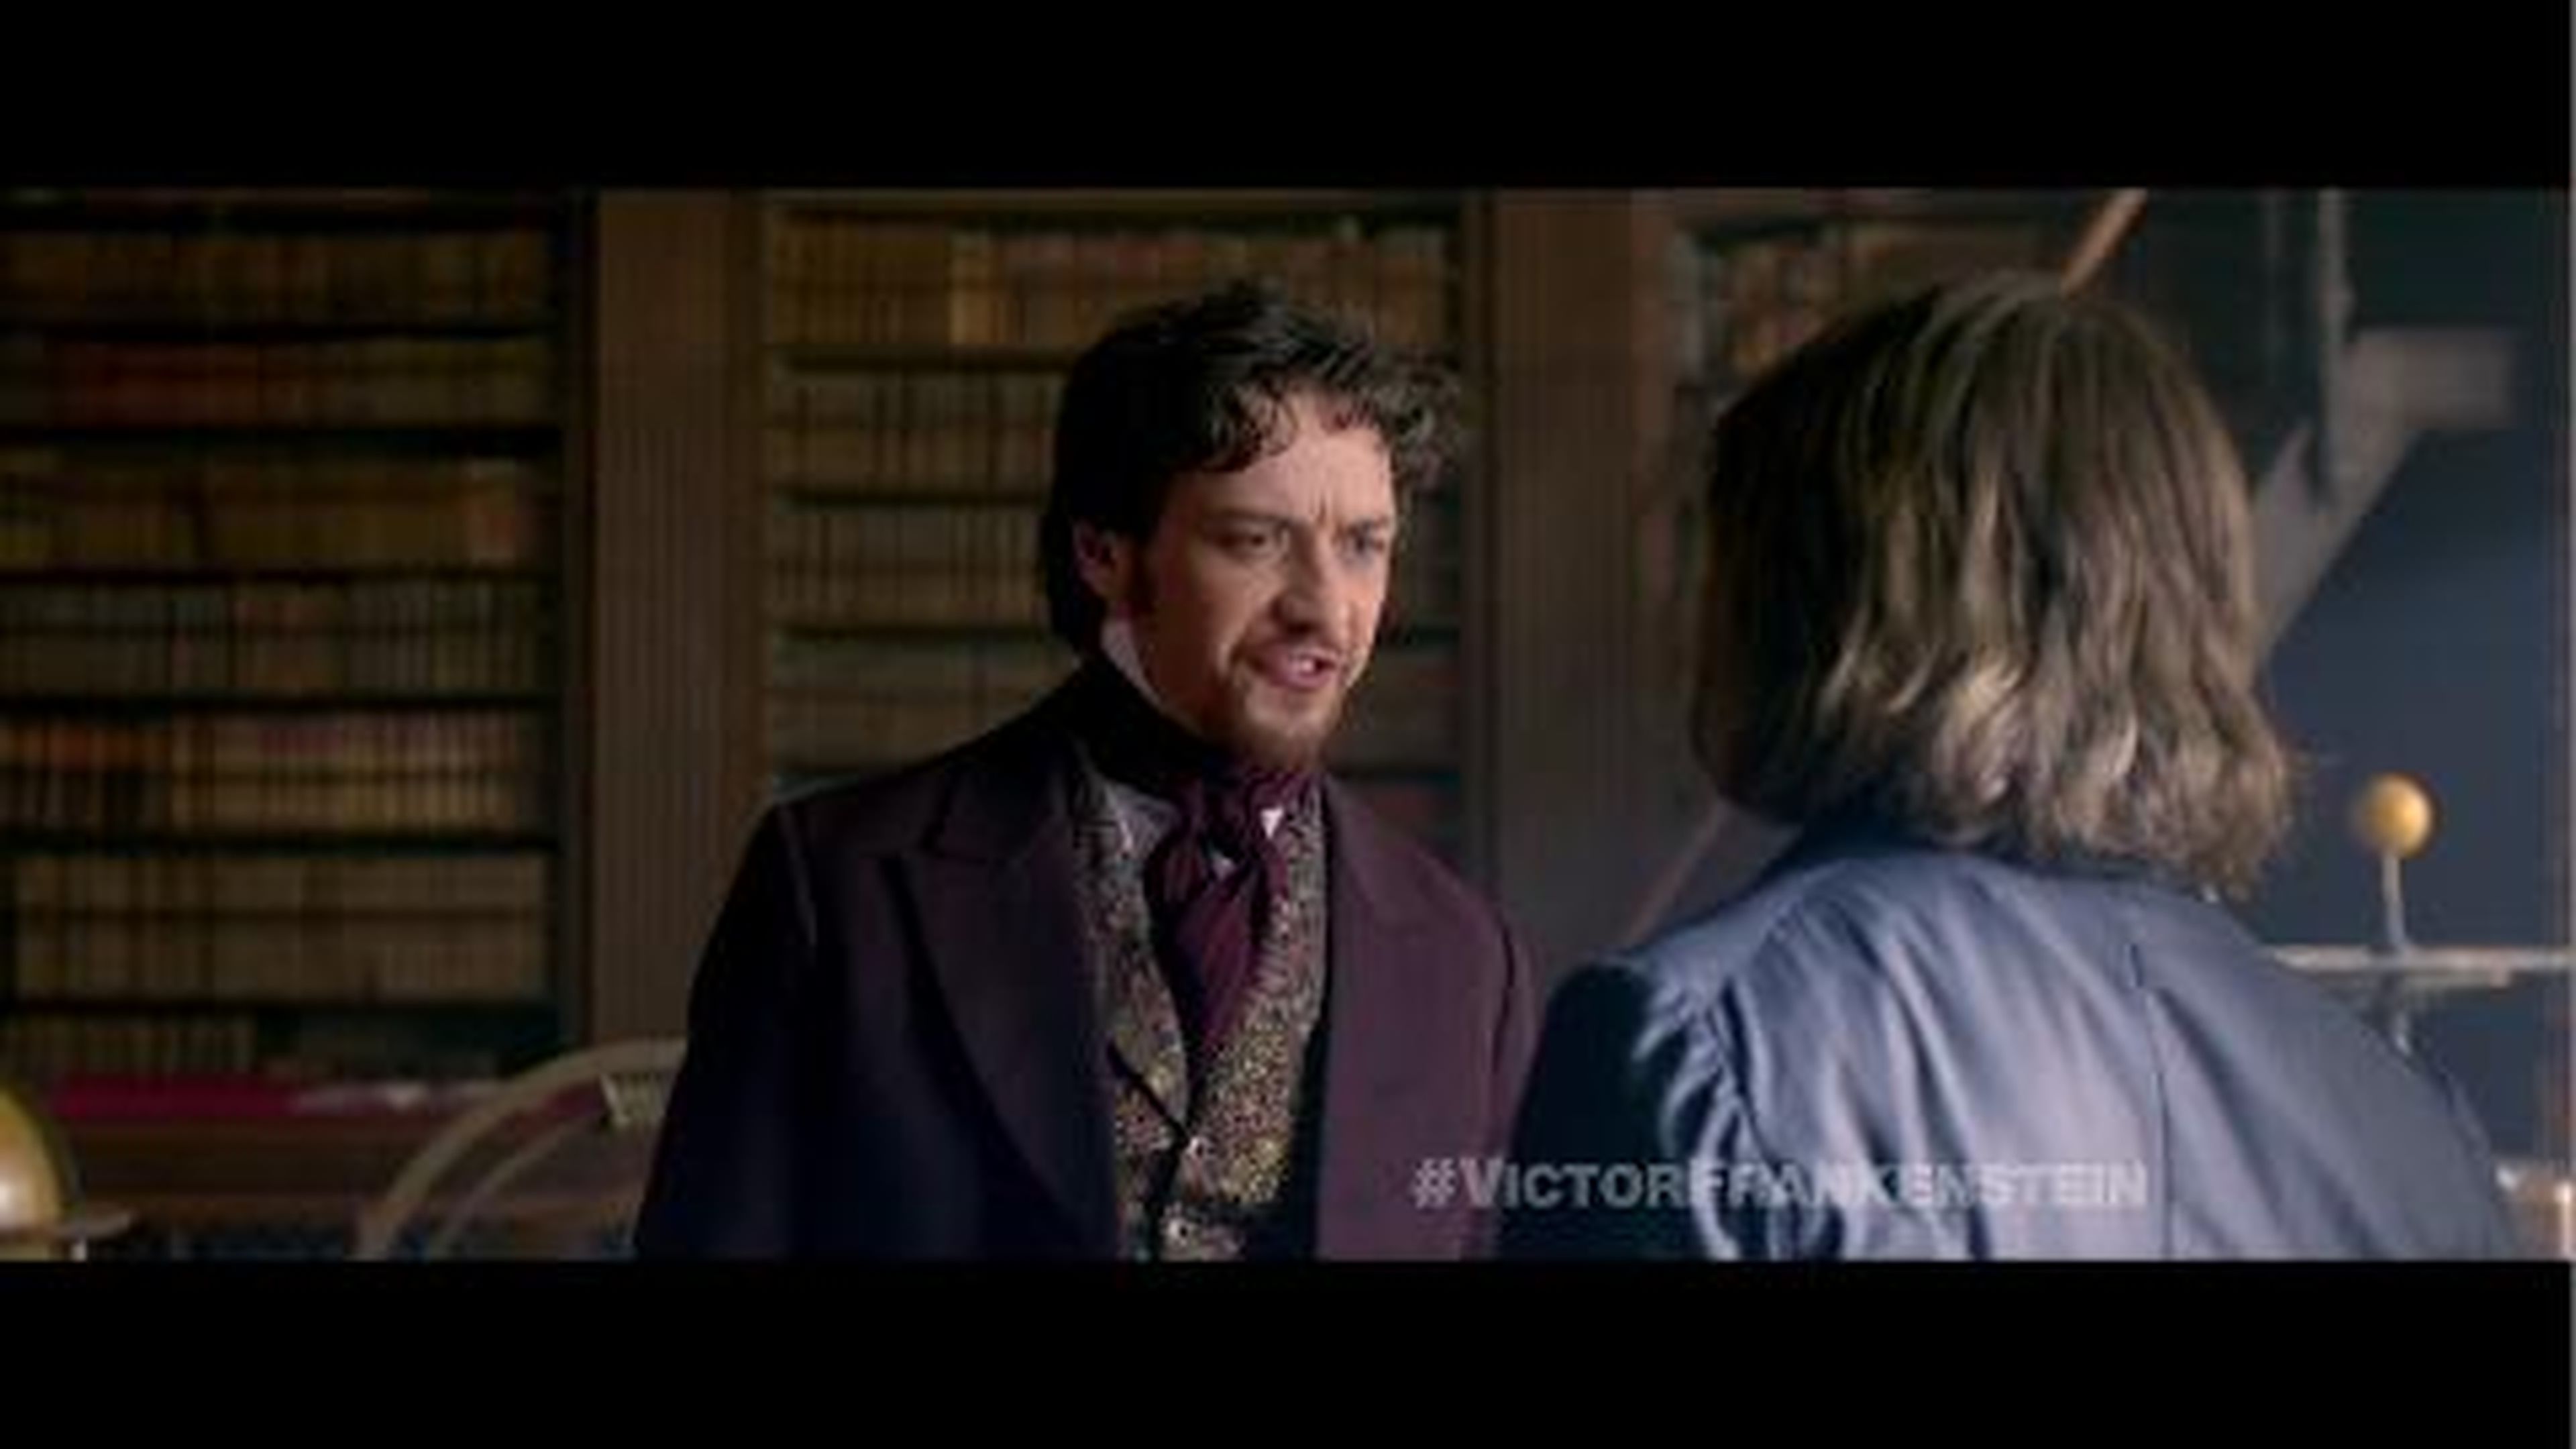 Victor Frankenstein - -Bloody Prints on the Floor- TV Commercial [HD] - 20th Century FOX